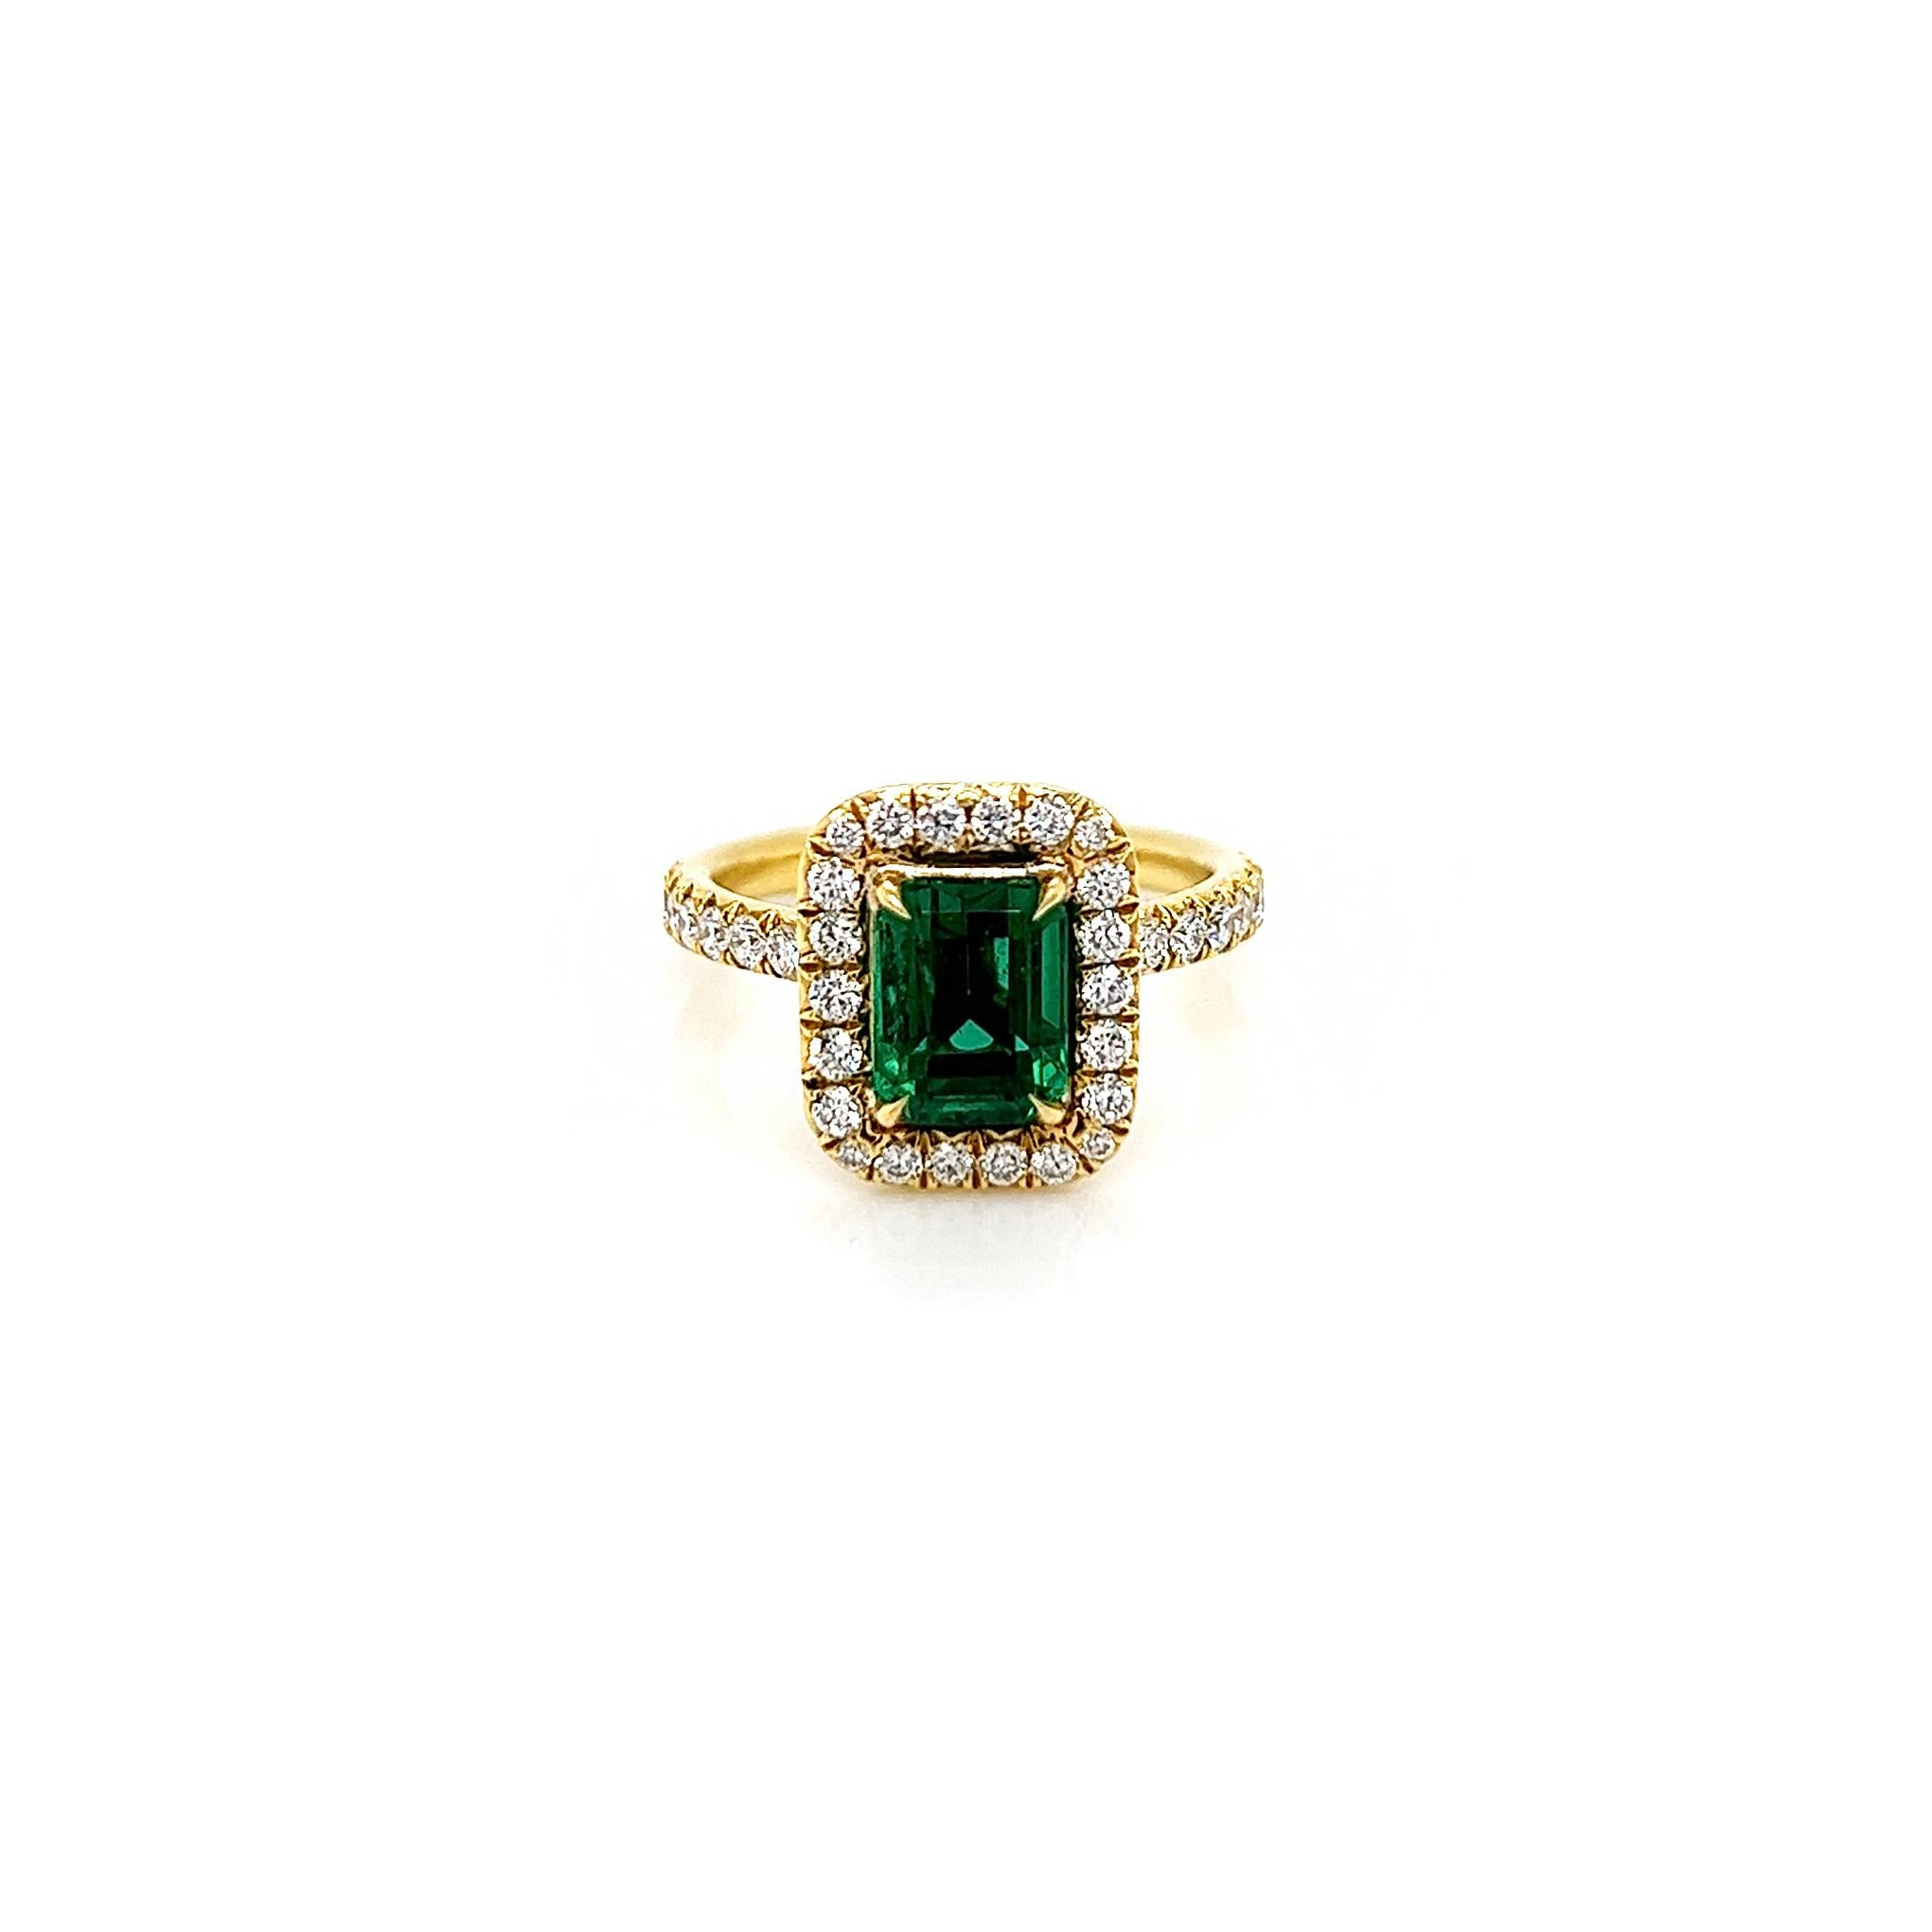 2.73 Total Carat Emerald and Diamond Halo Ladies Engagement Ring GIA

-Metal Type: 18K Yellow Gold
-1.72 Carat, Emerald Cut Natural Colombian Beryl Emerald, GIA Certified
-Emerald Color: Green
-1.01 Carat Round Natural side Diamonds. F-G Color,